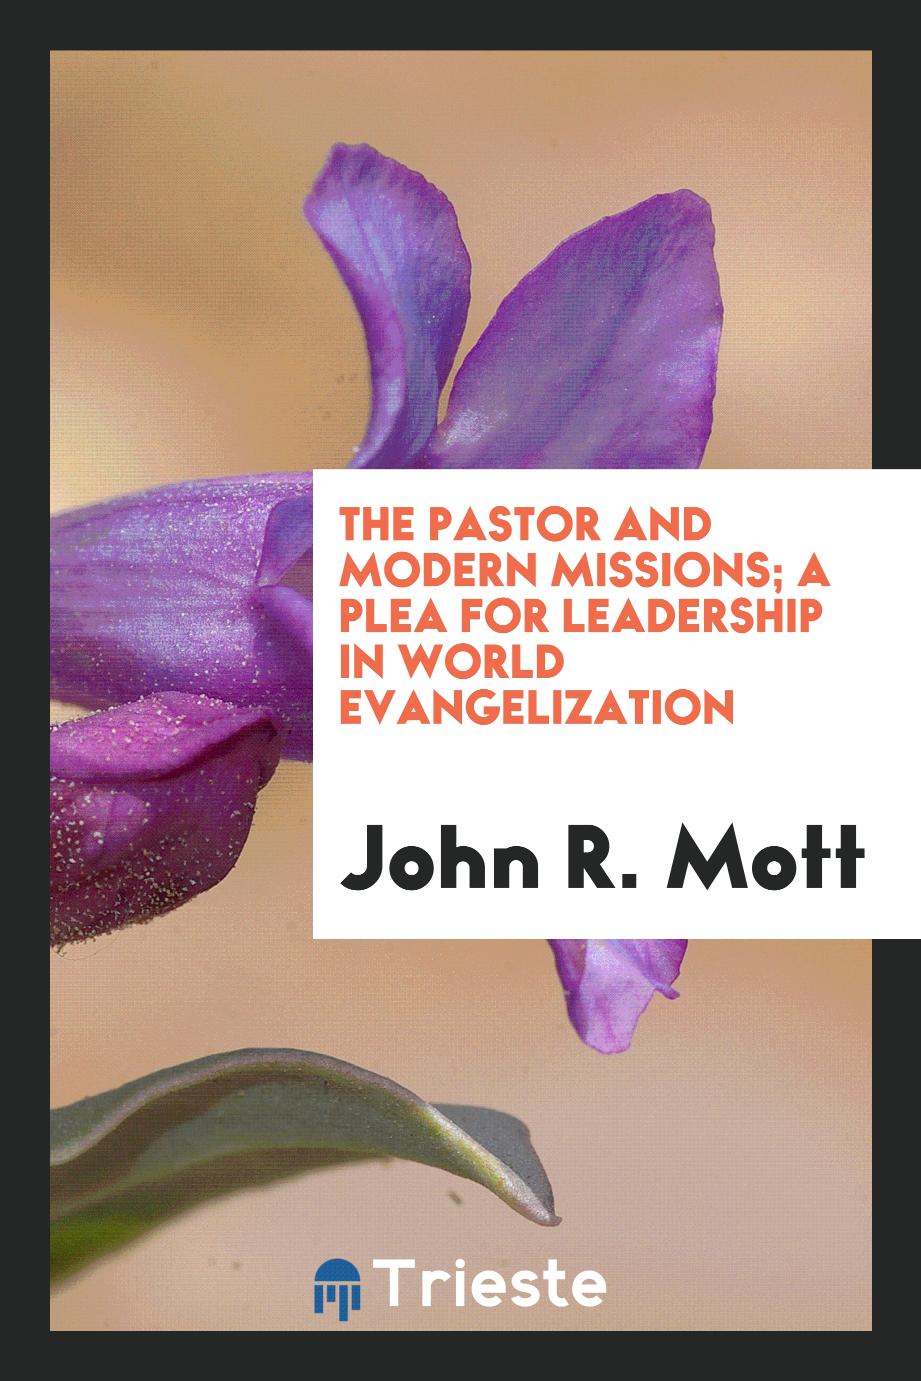 The pastor and modern missions; a plea for leadership in world evangelization